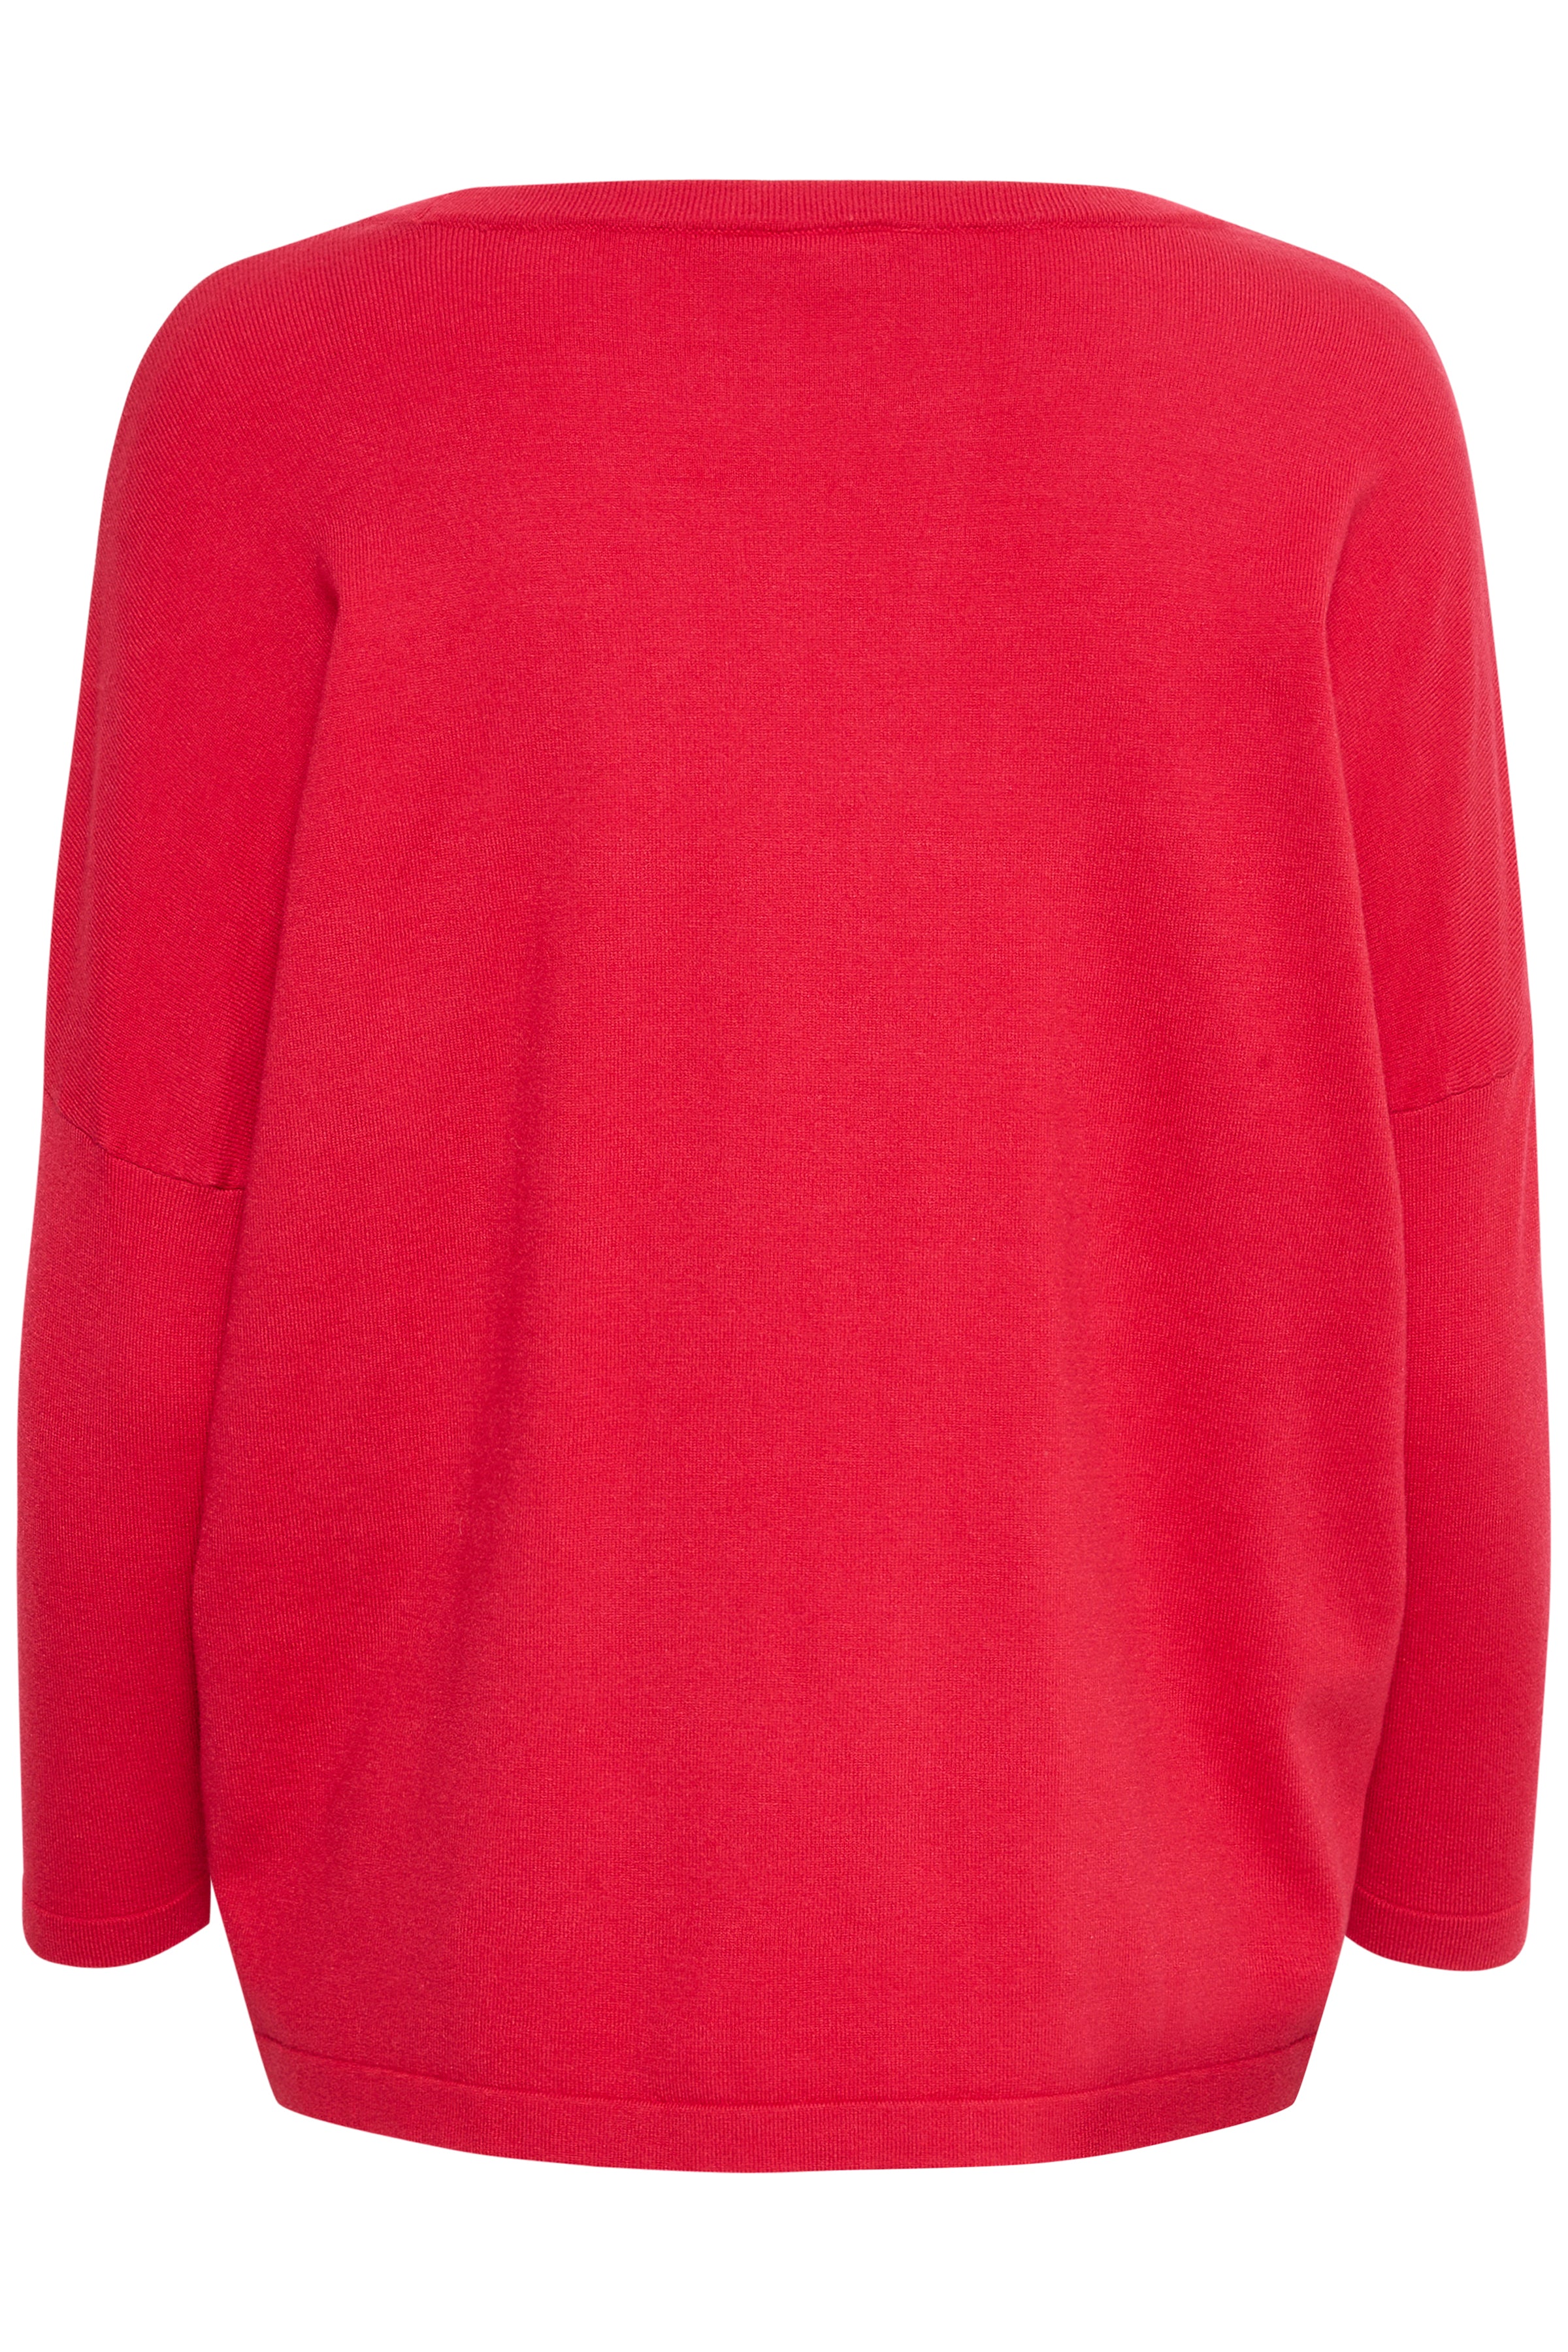 Saint Tropez Baria Star Pullover in Winterberry Red